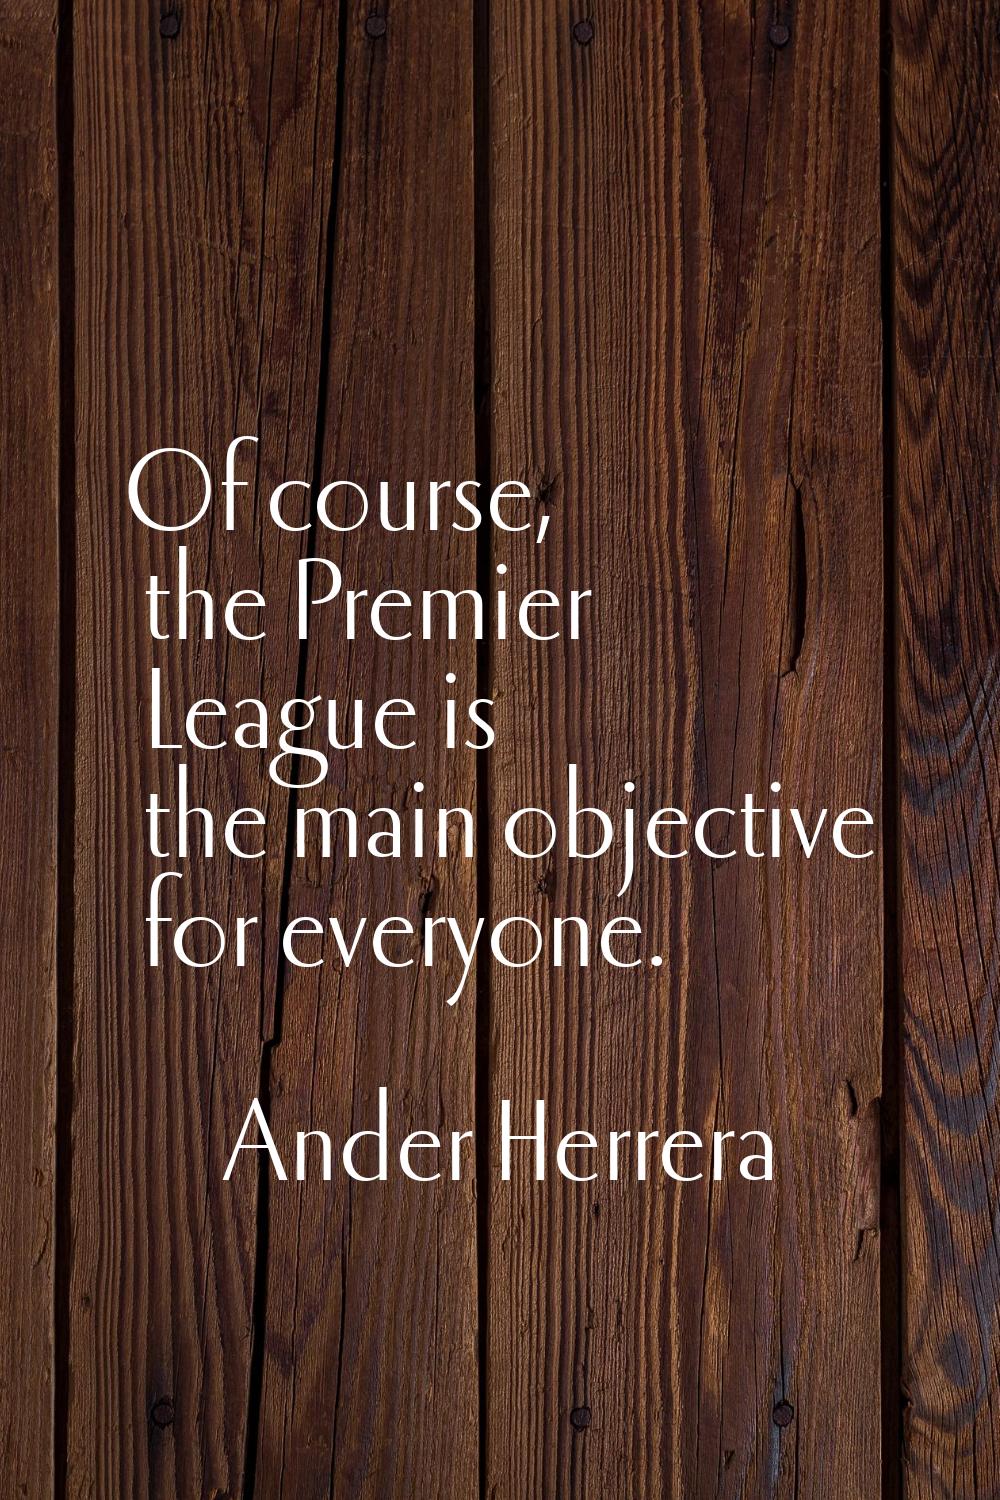 Of course, the Premier League is the main objective for everyone.